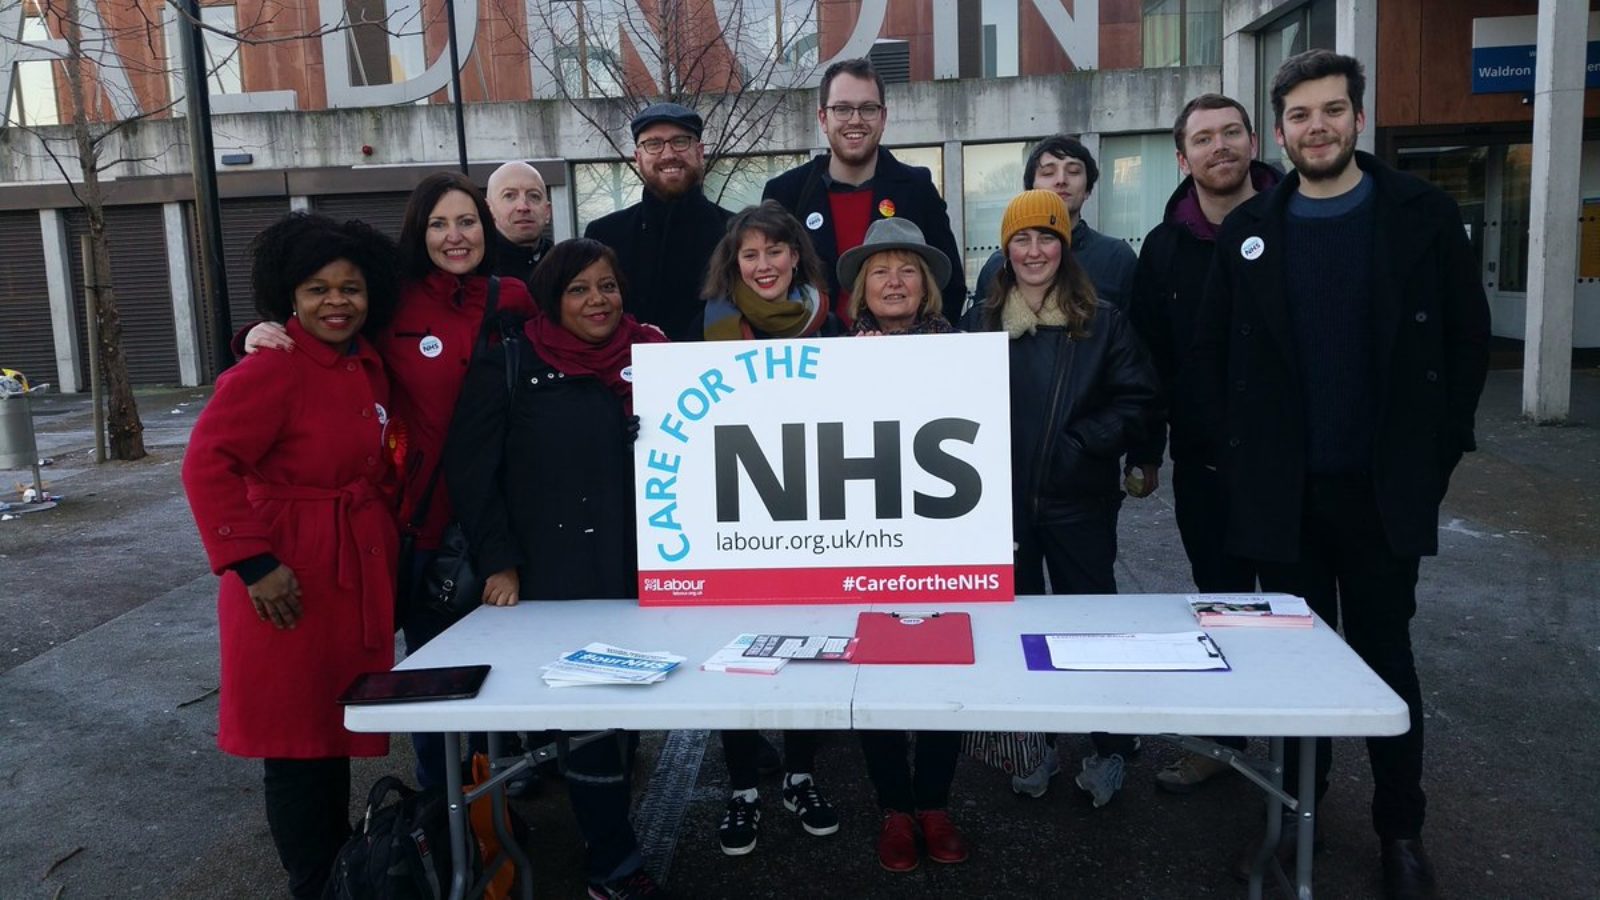 NHS campaigners